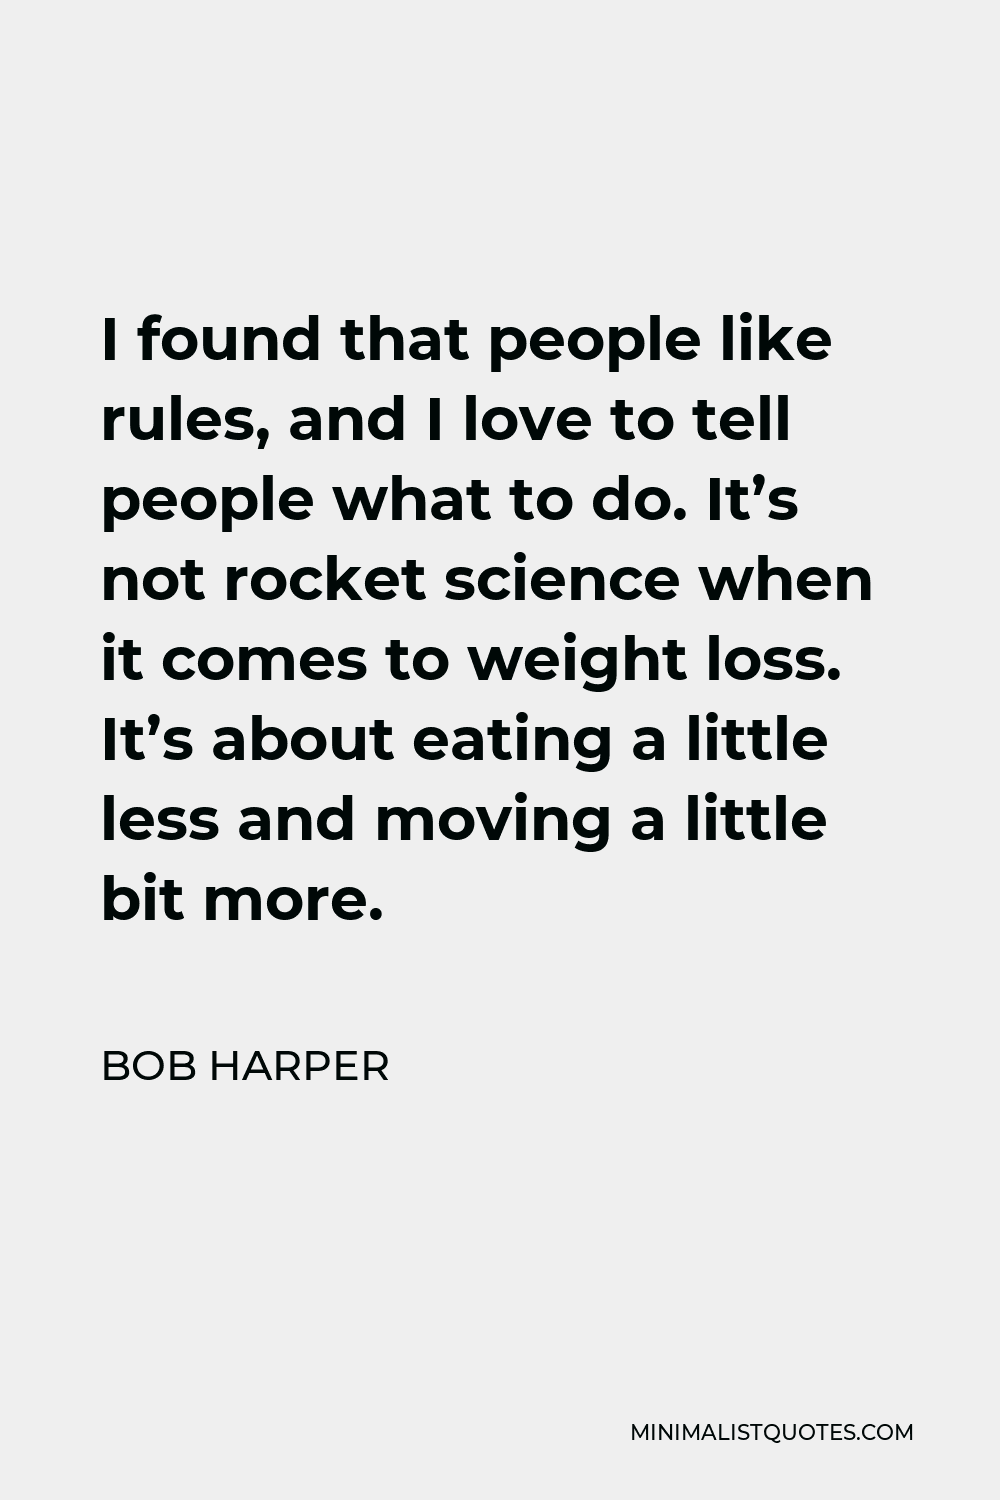 Bob Harper Quote - I found that people like rules, and I love to tell people what to do. It’s not rocket science when it comes to weight loss. It’s about eating a little less and moving a little bit more.